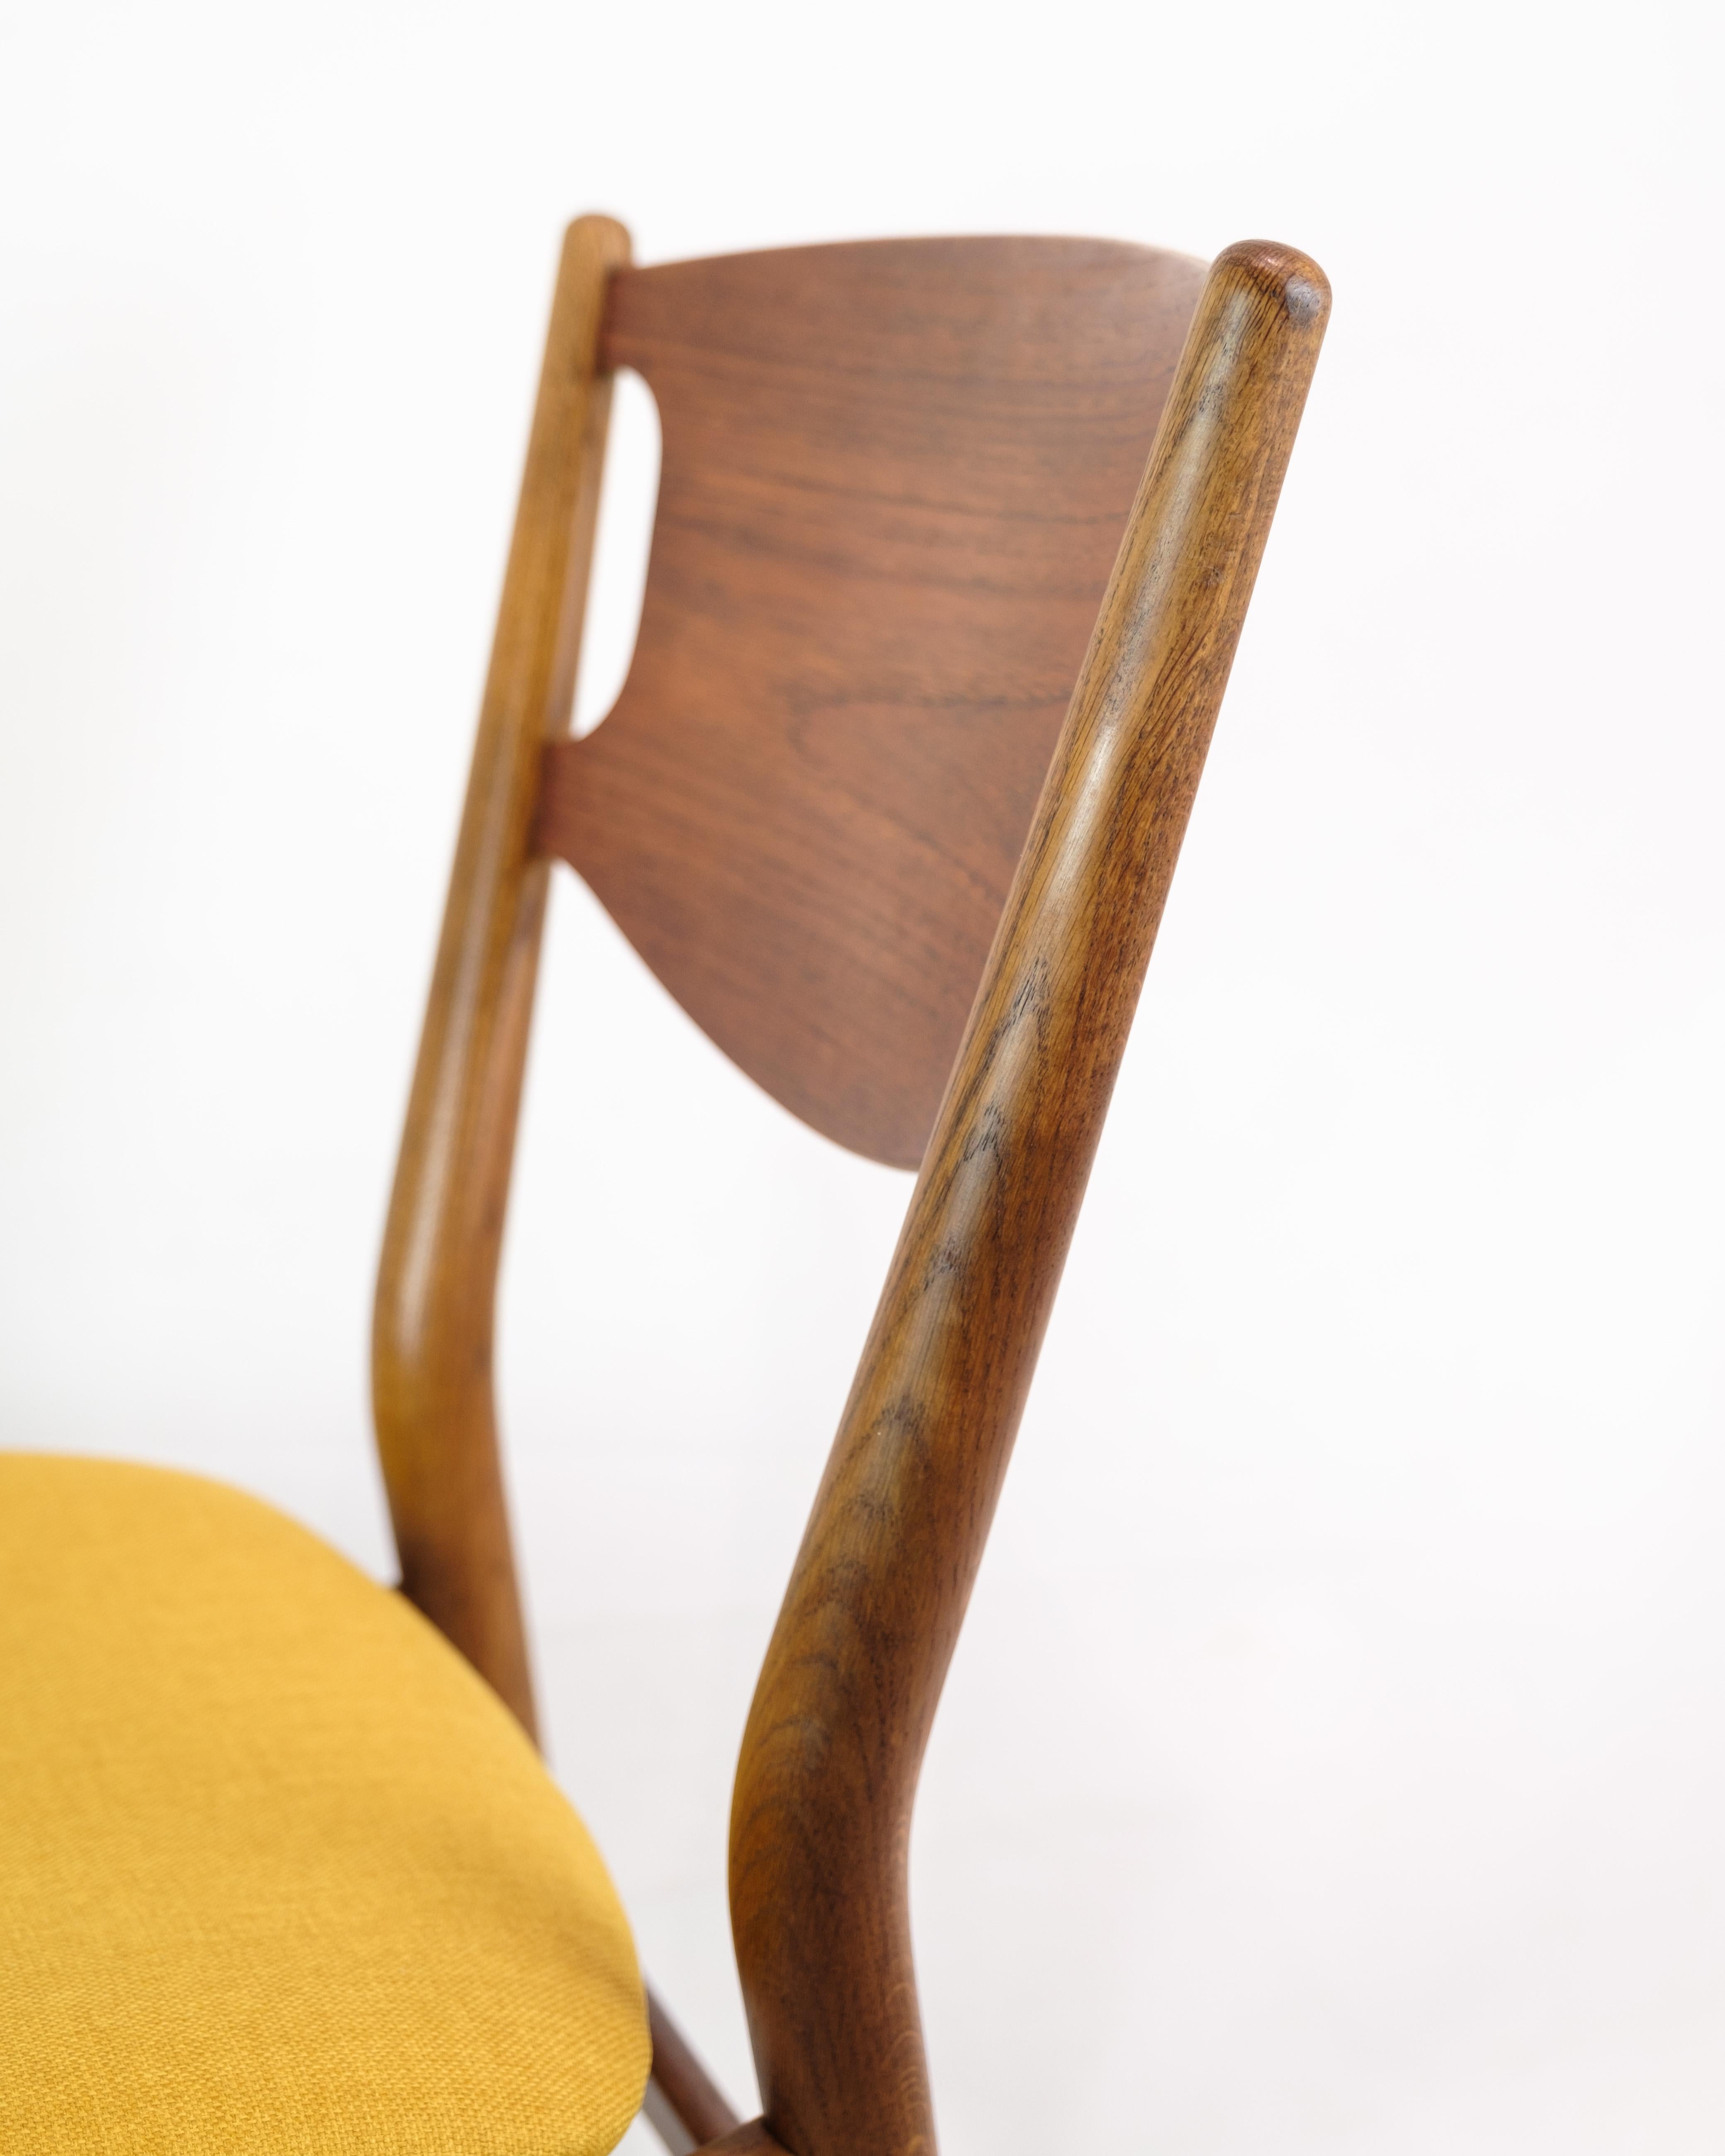 Set of four dining chairs, designed by a Danish master carpenter in teak wood with yellow fabric cover from around the 1960s.

This product will be inspected thoroughly at our professional workshop by our educated employees, who assure the product